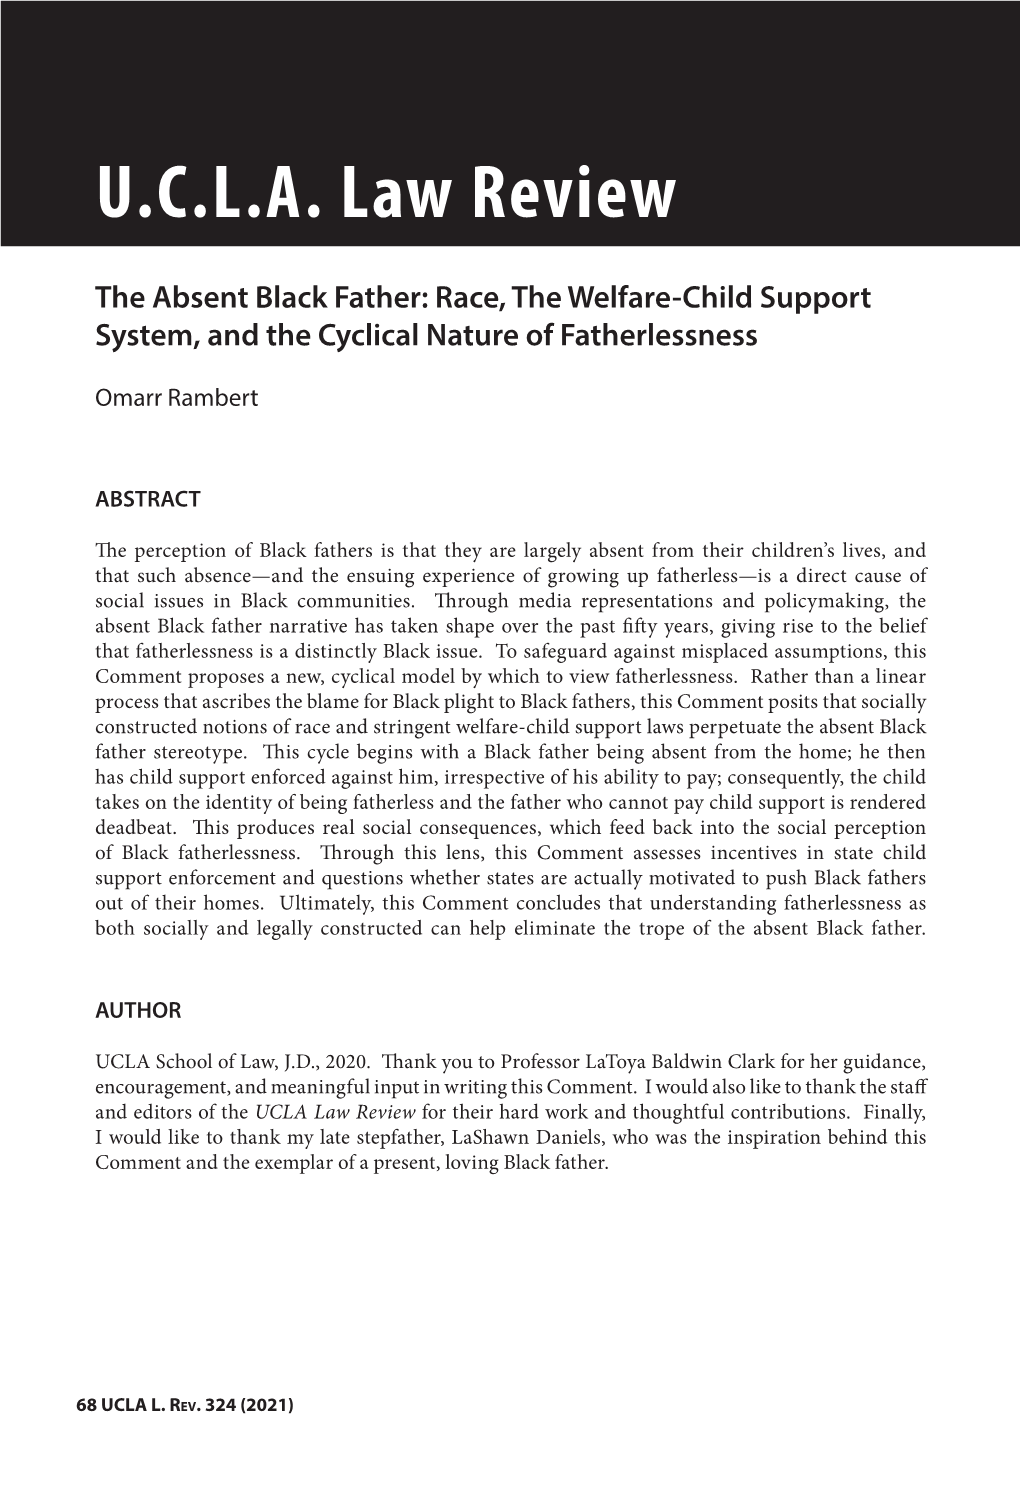 UCLA Law Review the Absent Black Father: Race, the Welfare